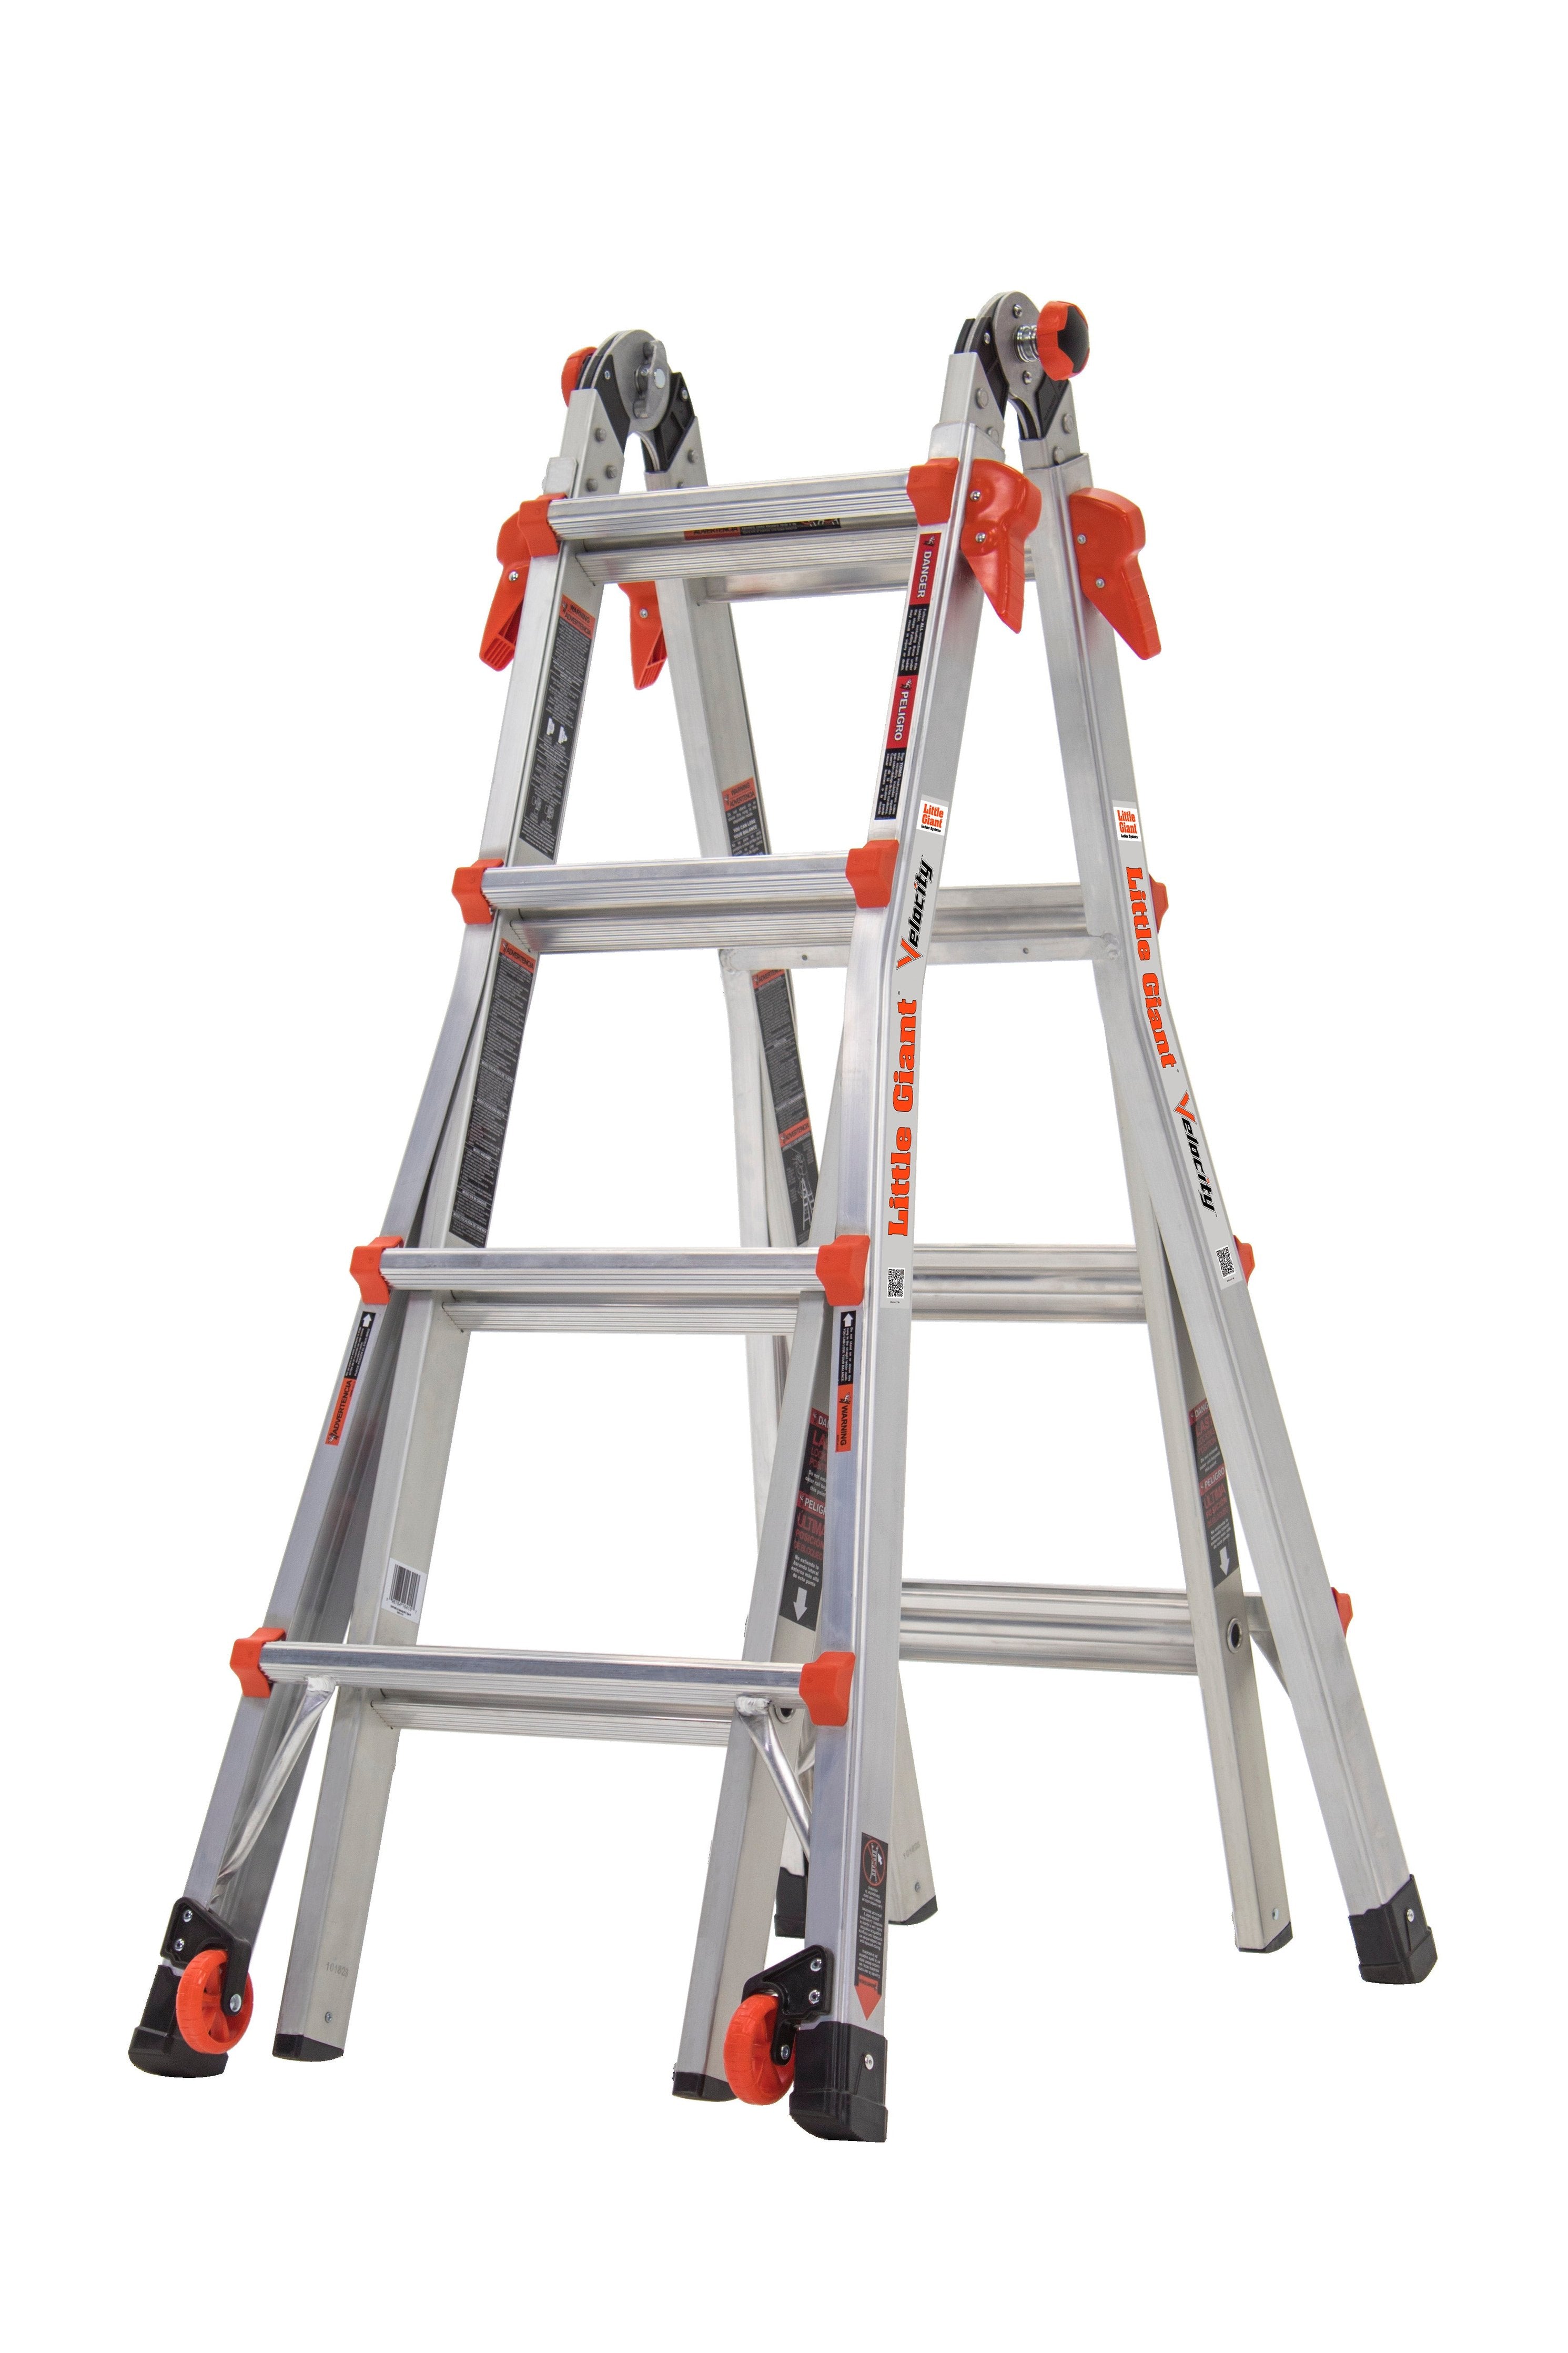 Little Giant 15417-318 - VELOCITY, Model 17 - CSA Grade IA - 300 lb/136 kg Rated, Aluminum Articulated Extendable Ladder with RATCHET Levelers